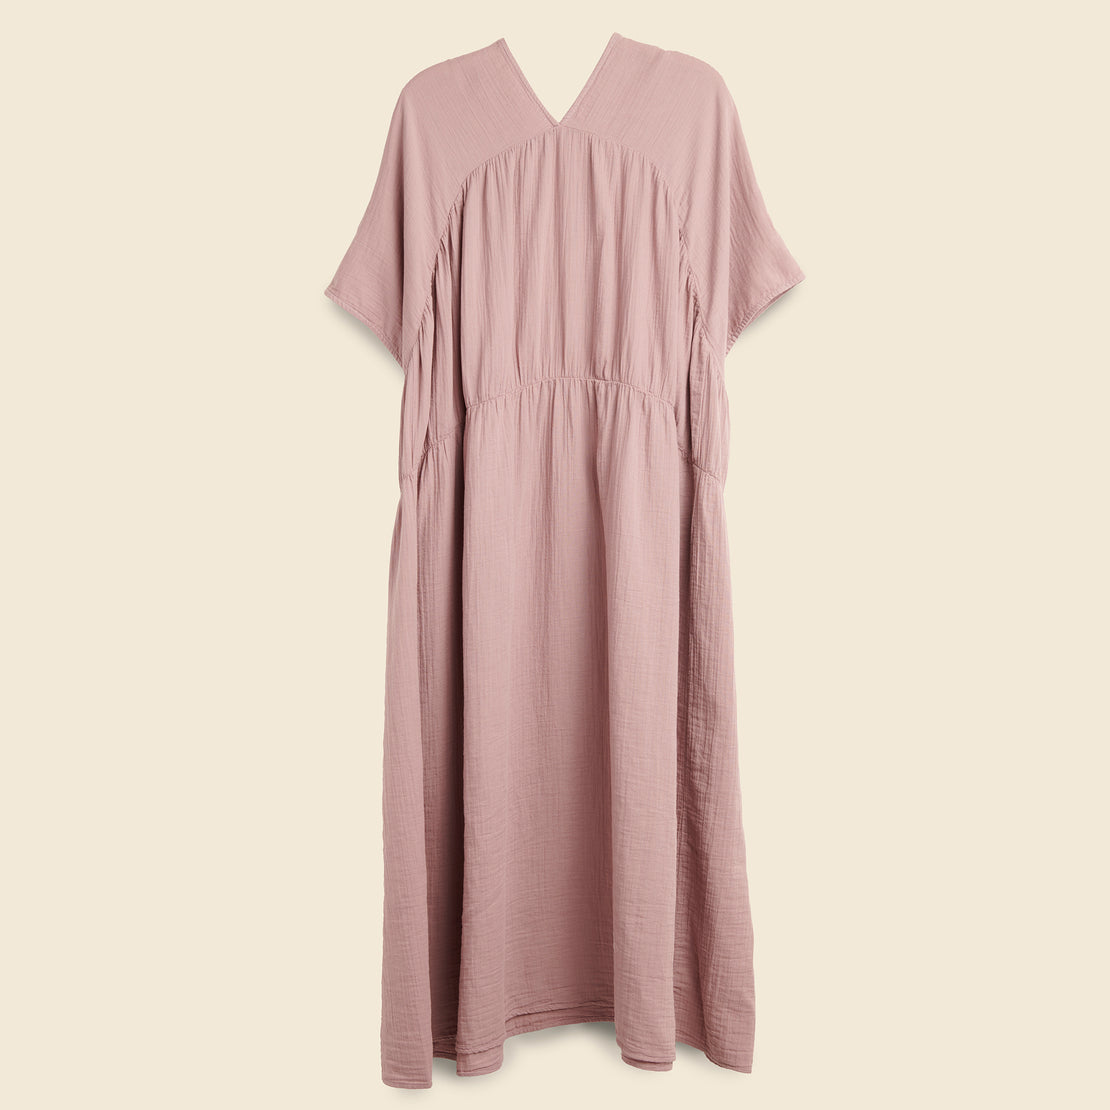 Lihue Dress - Desert Lavender - Atelier Delphine - STAG Provisions - W - Onepiece - Dress